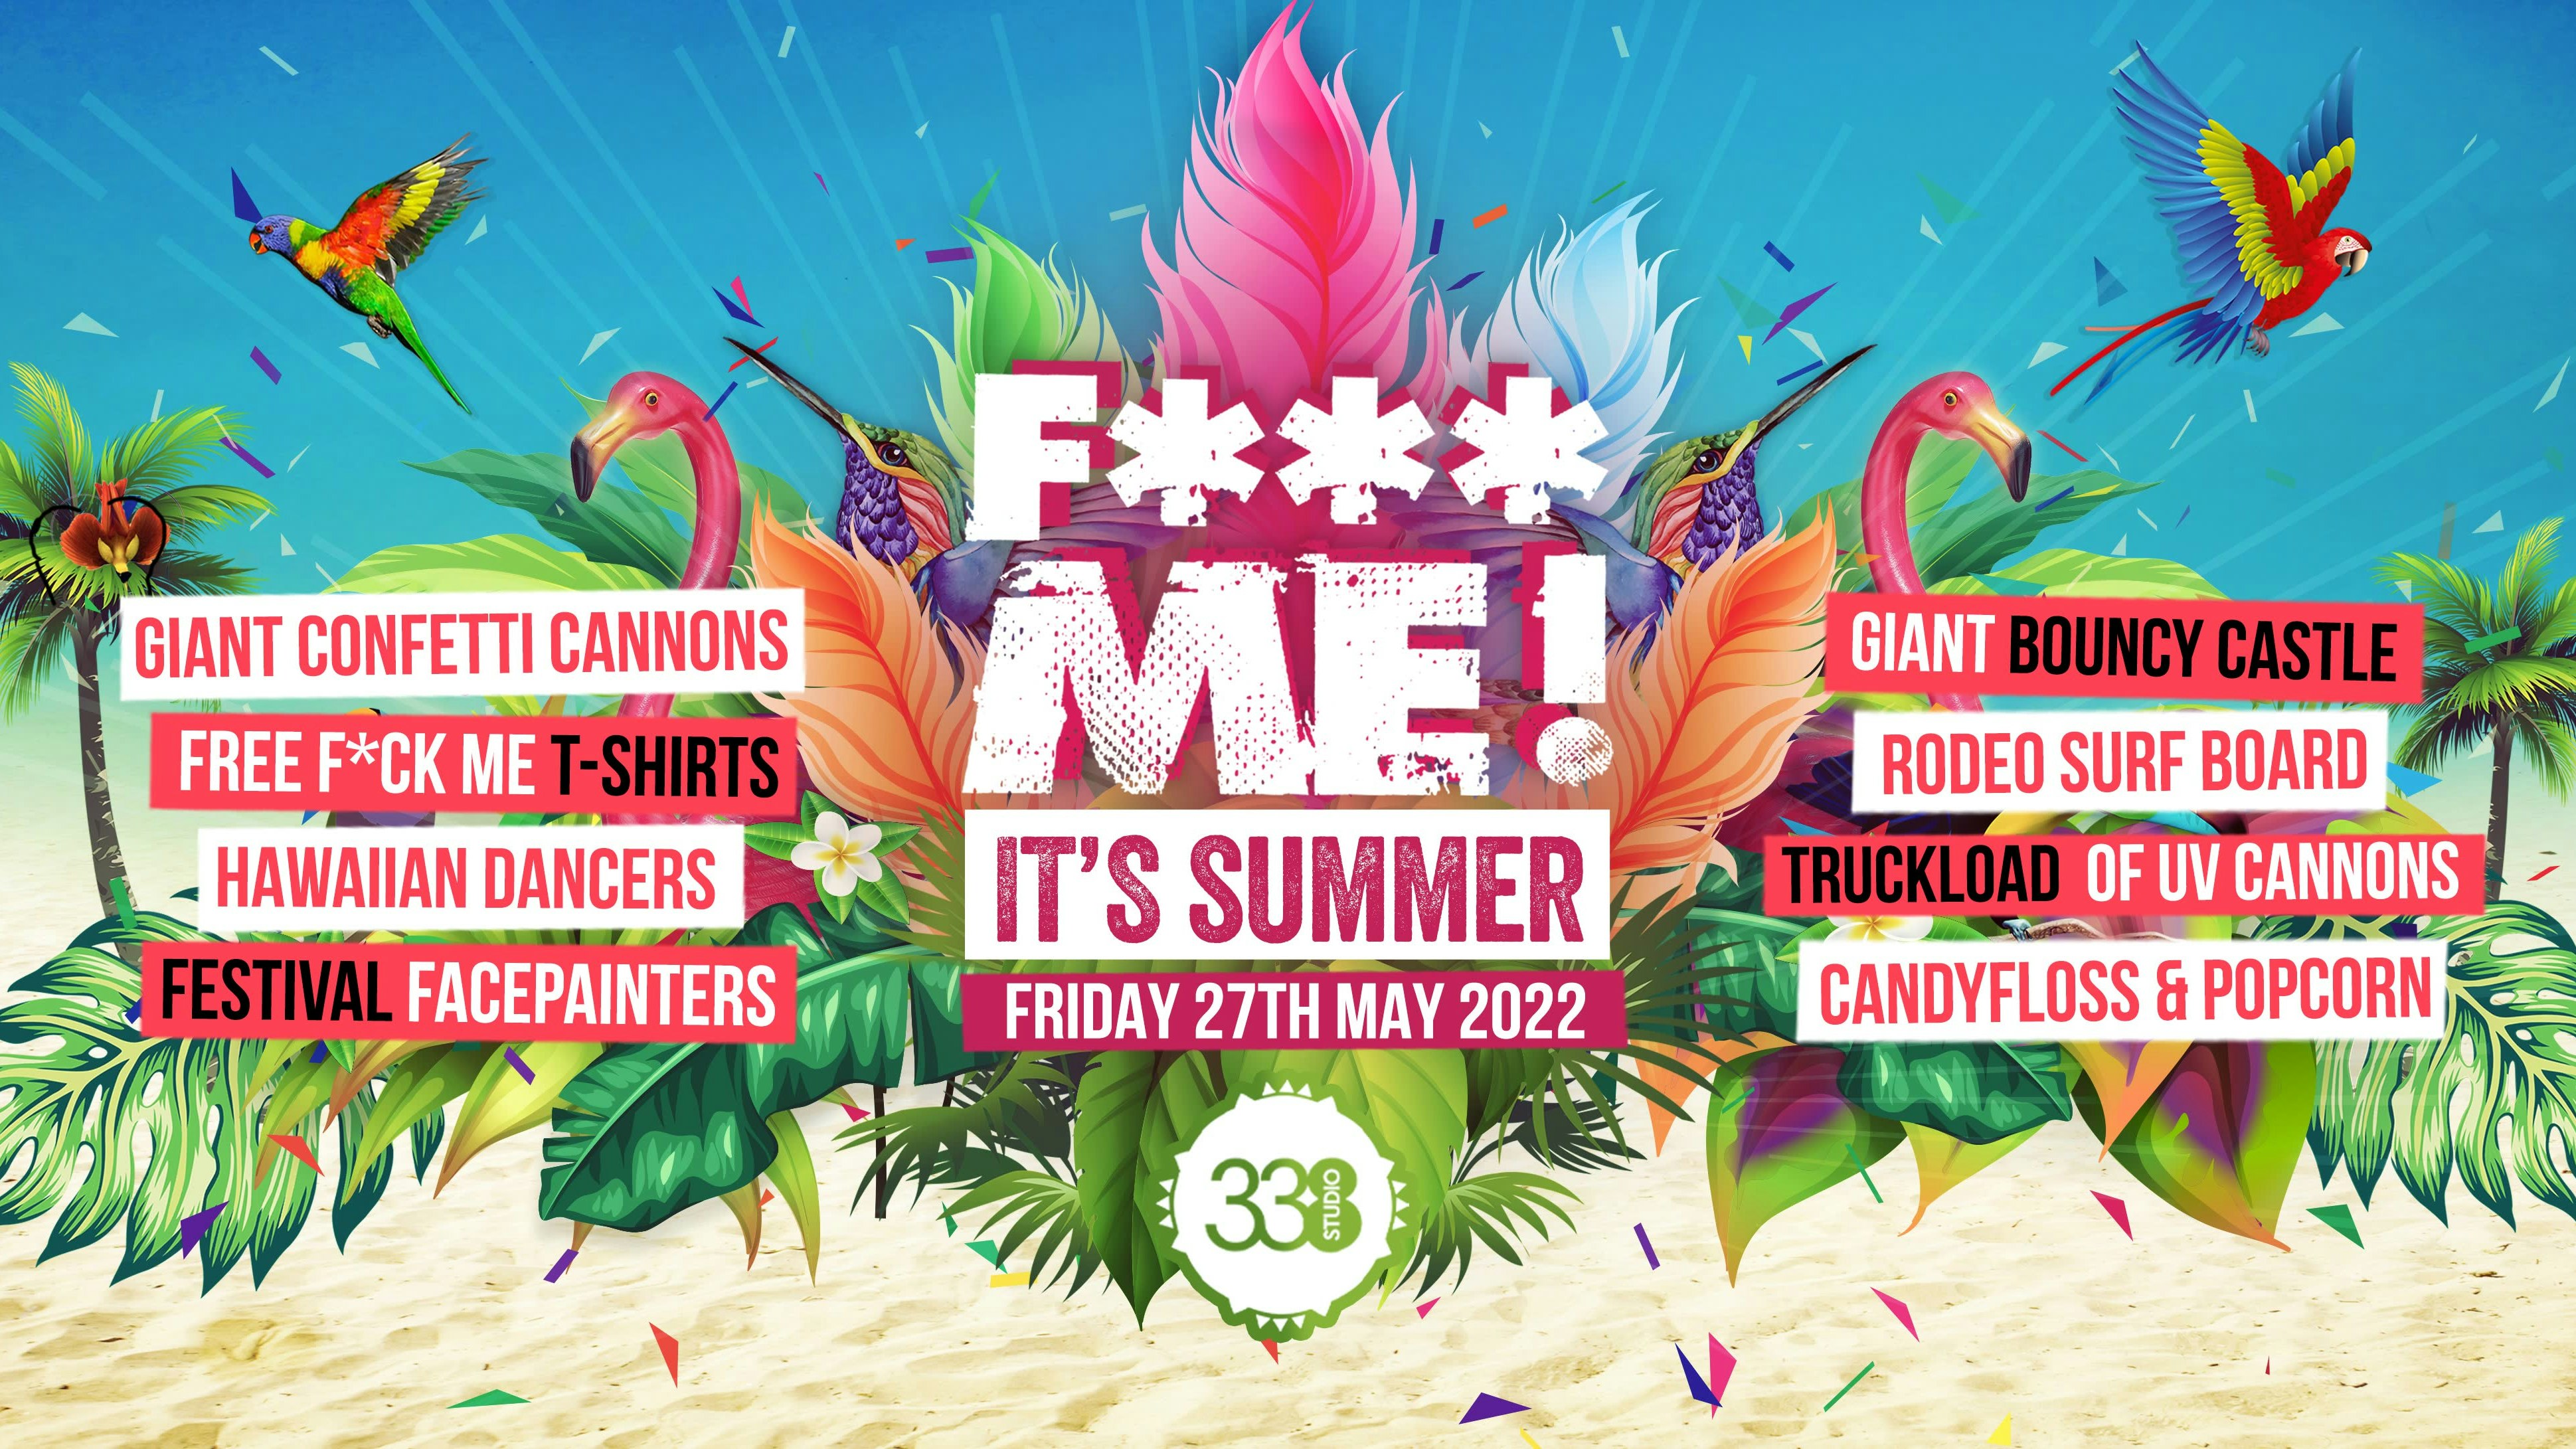 F*CK ME ITS SUMMER @ STUDIO 338! THIS EVENT WILL SELL OUT!